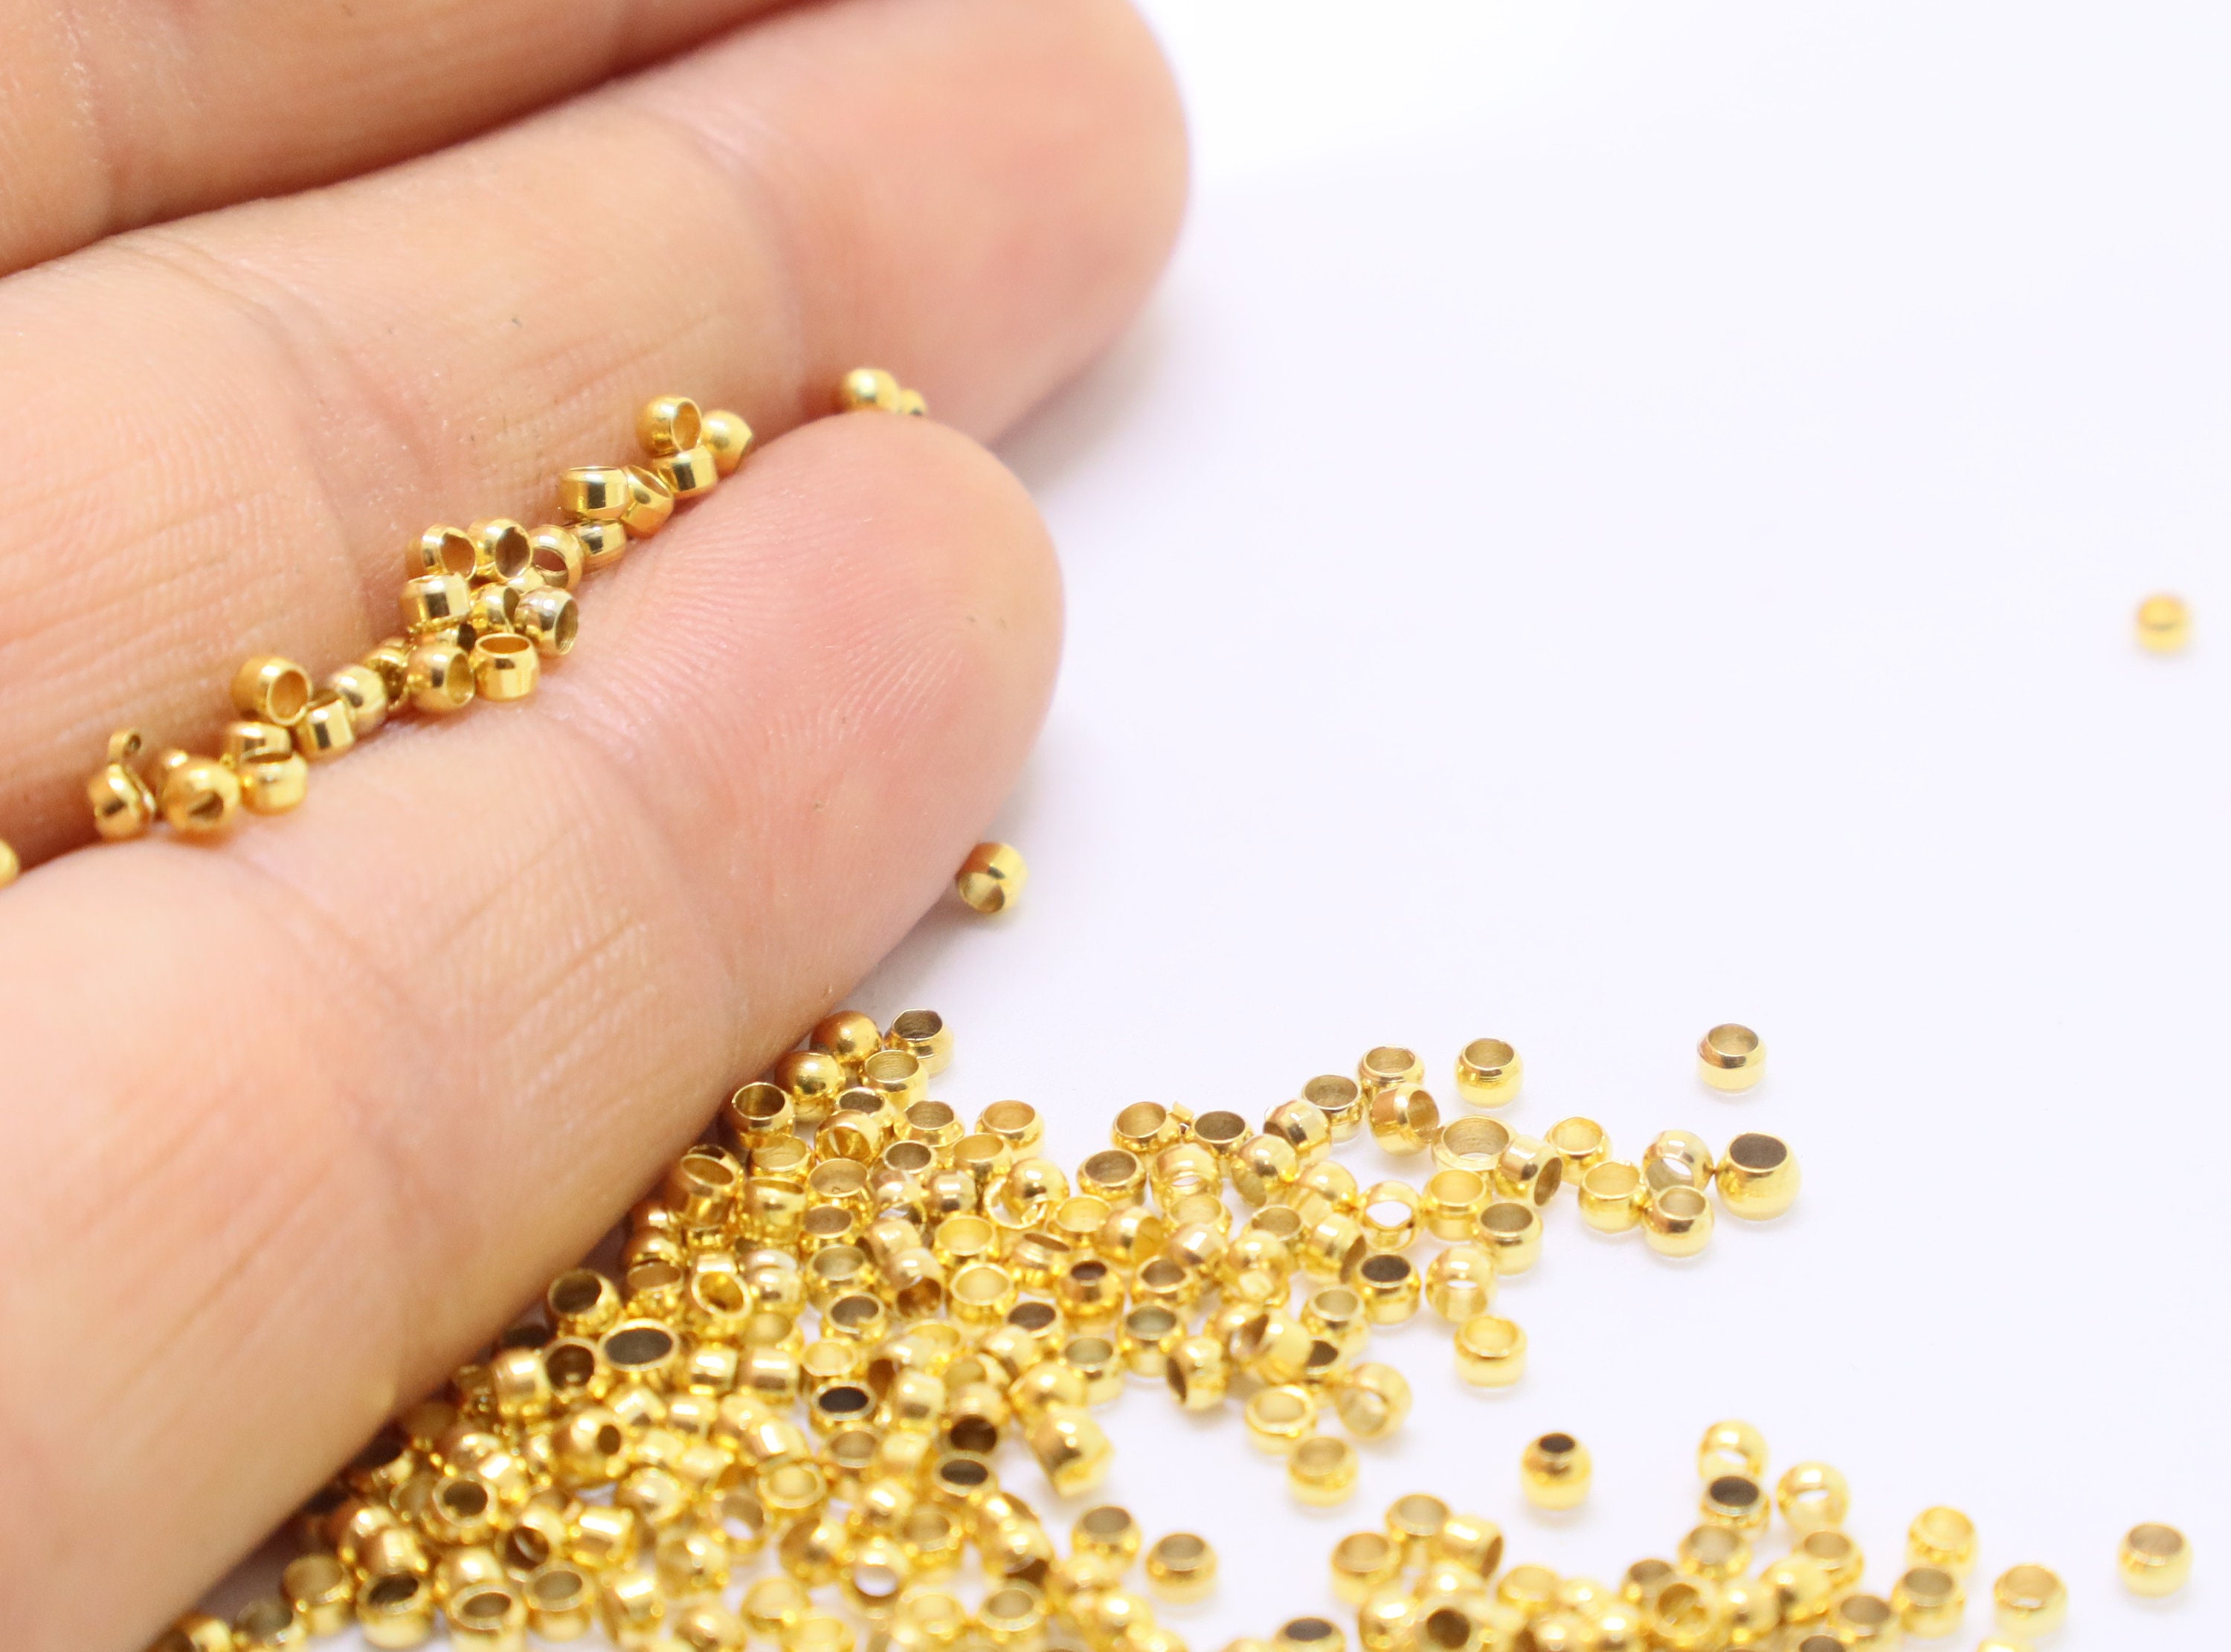 100 Pcs Gold Plated Crimp Cover For Jewelry Making at Rs 180.00